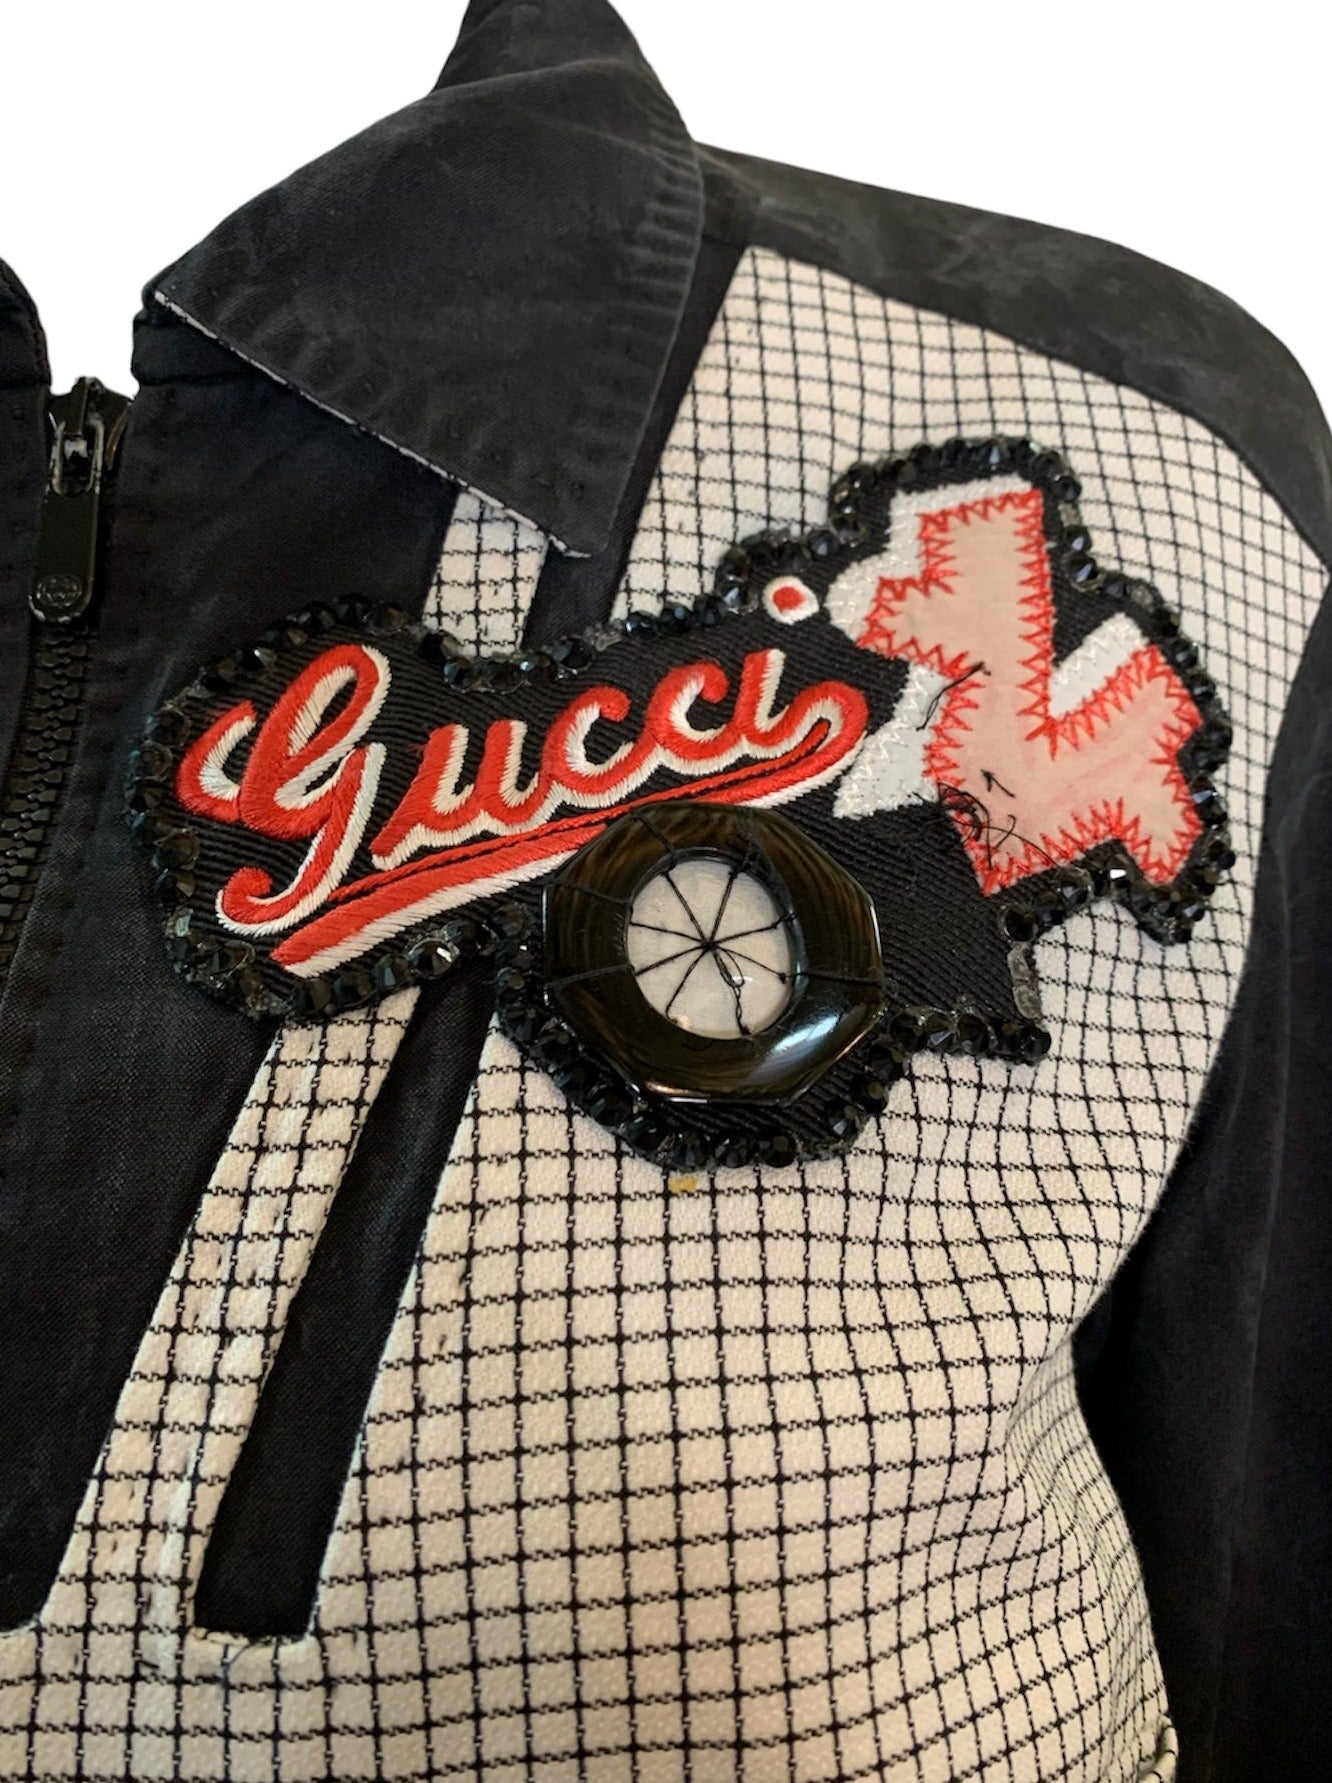  GUCCI Contemporary Bomber Style Jacket with Patches DETAIL 4 of 6